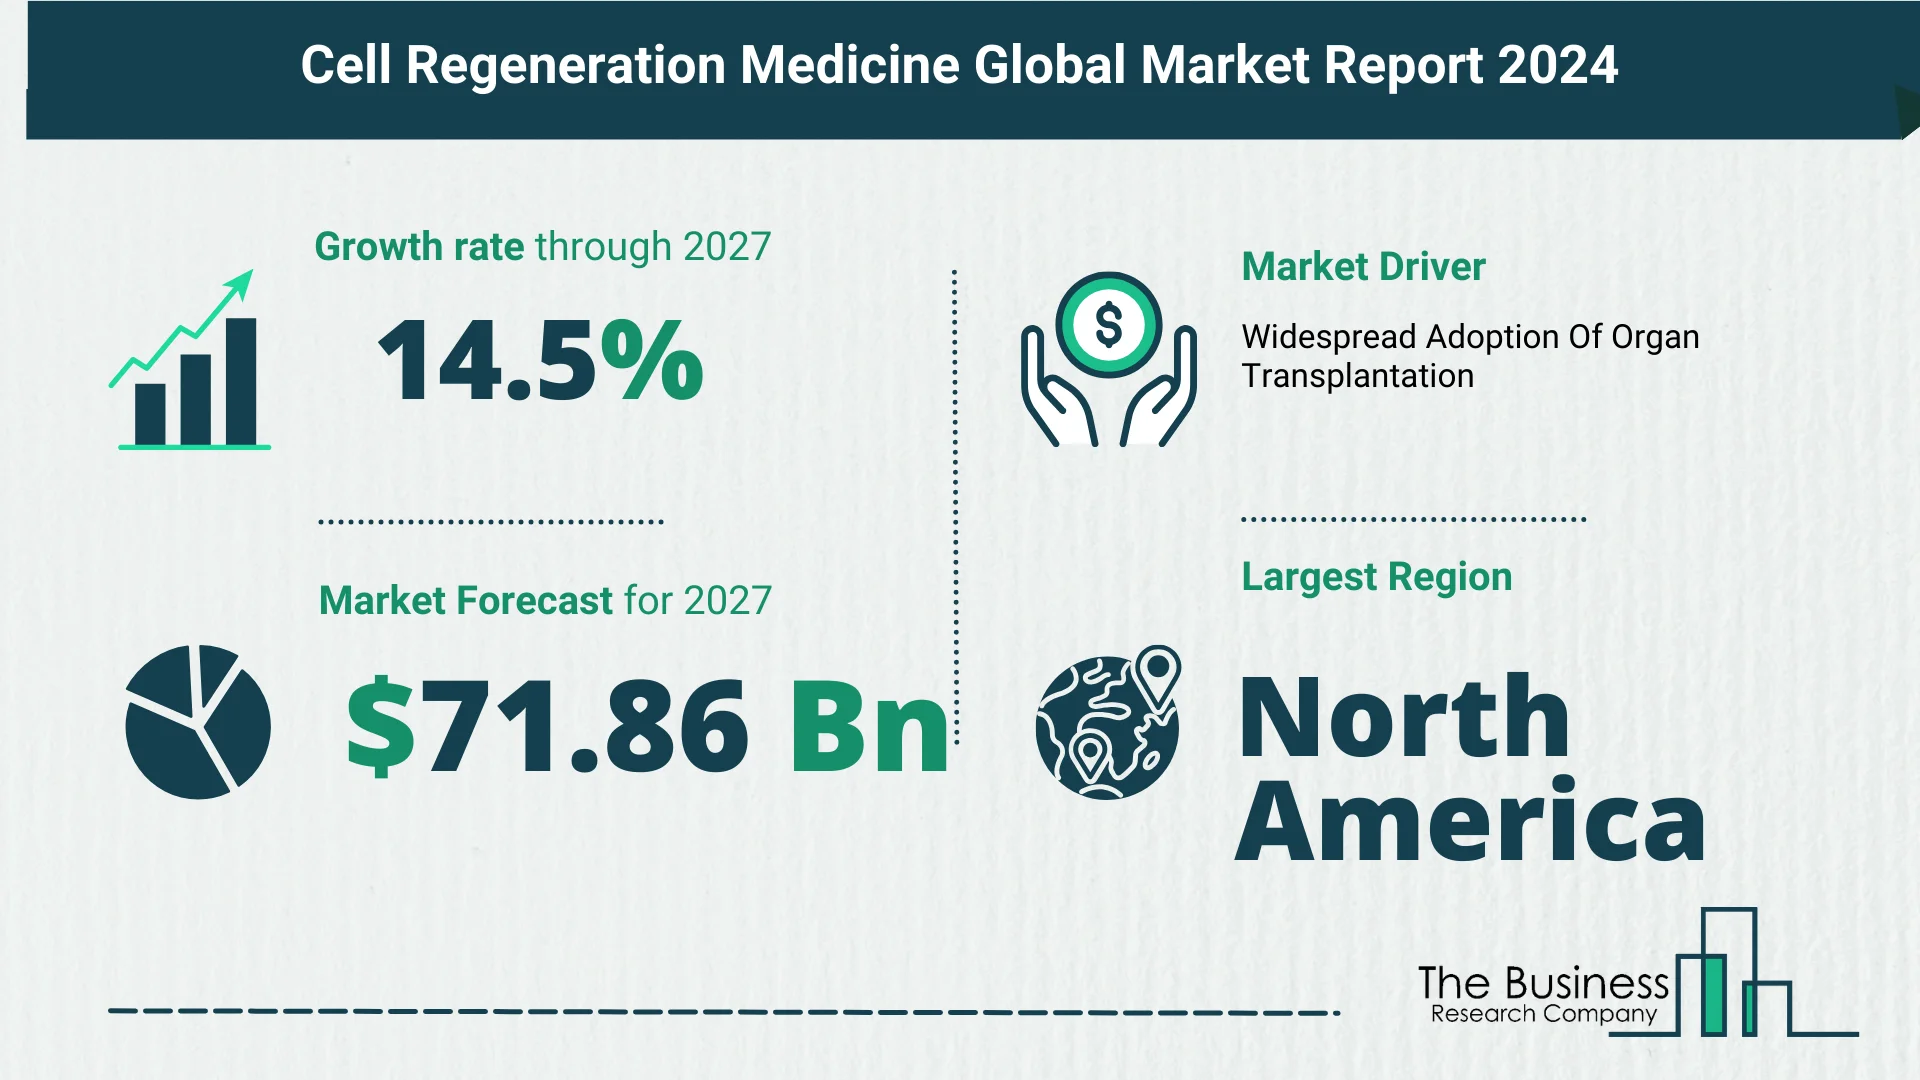 Key Insights On The Cell Regeneration Medicine Market 2023 – Size, Driver, And Major Players